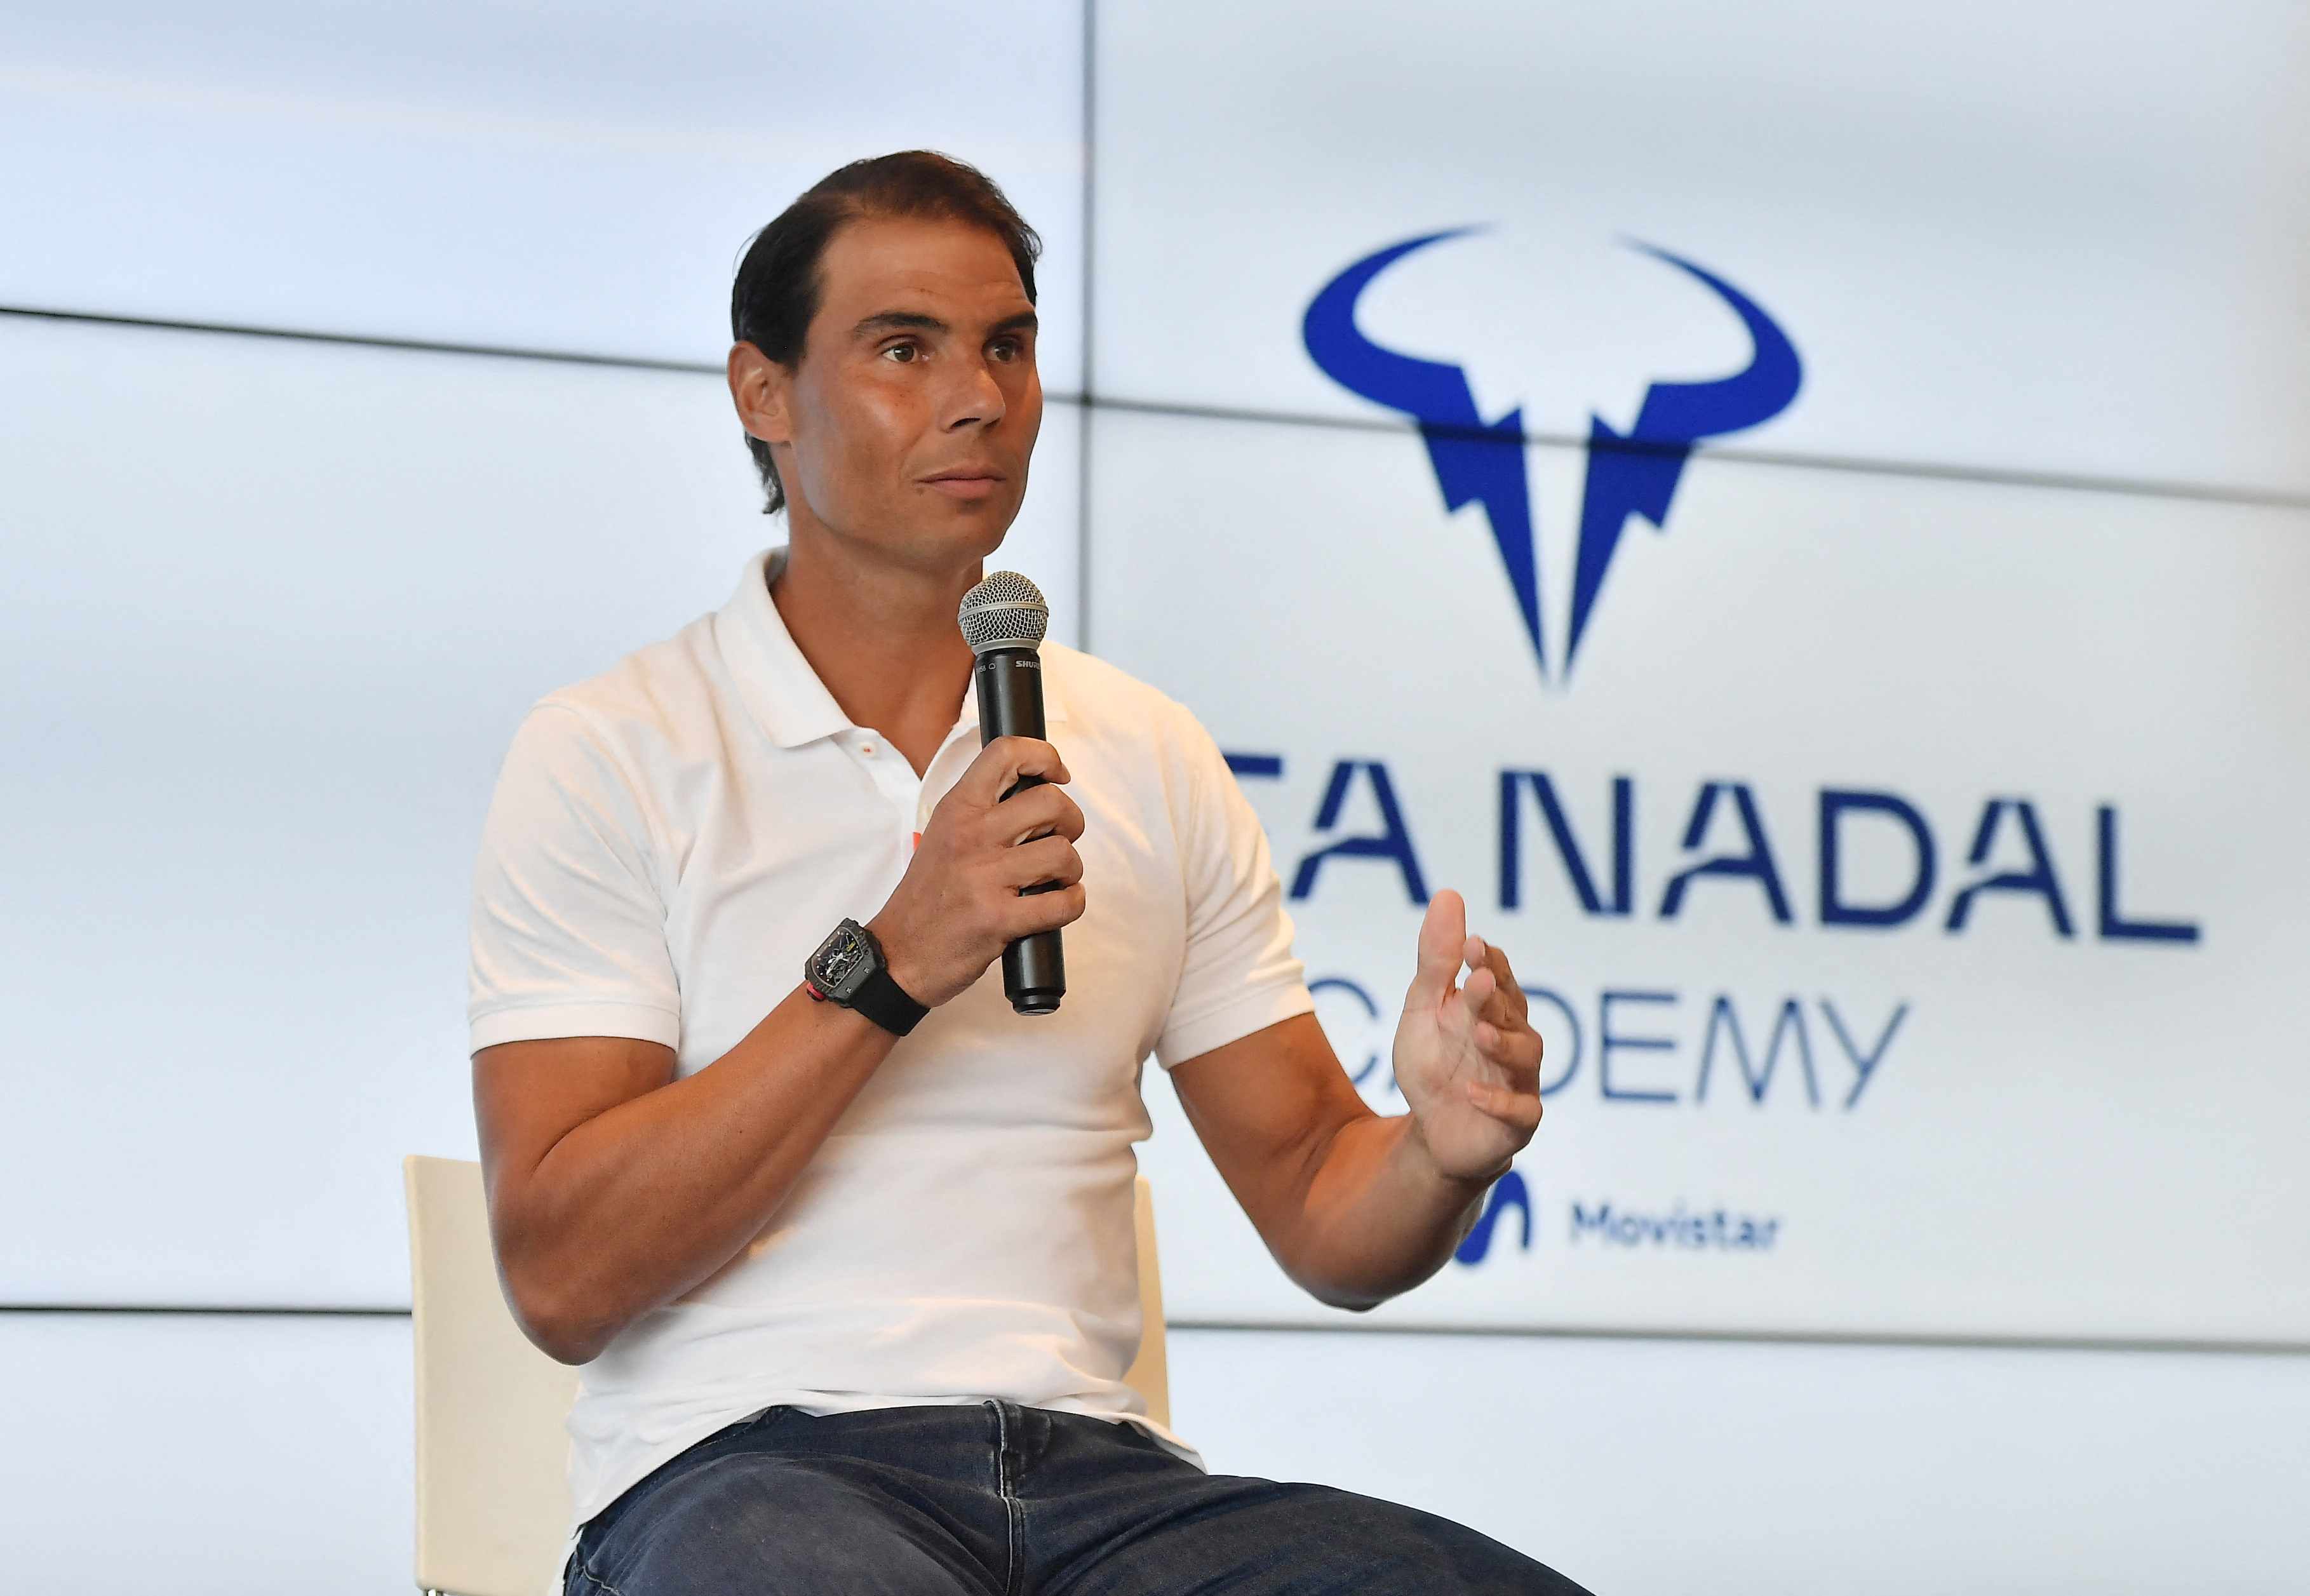 Rafael Nadal pulls out of French Open due to injury and announces